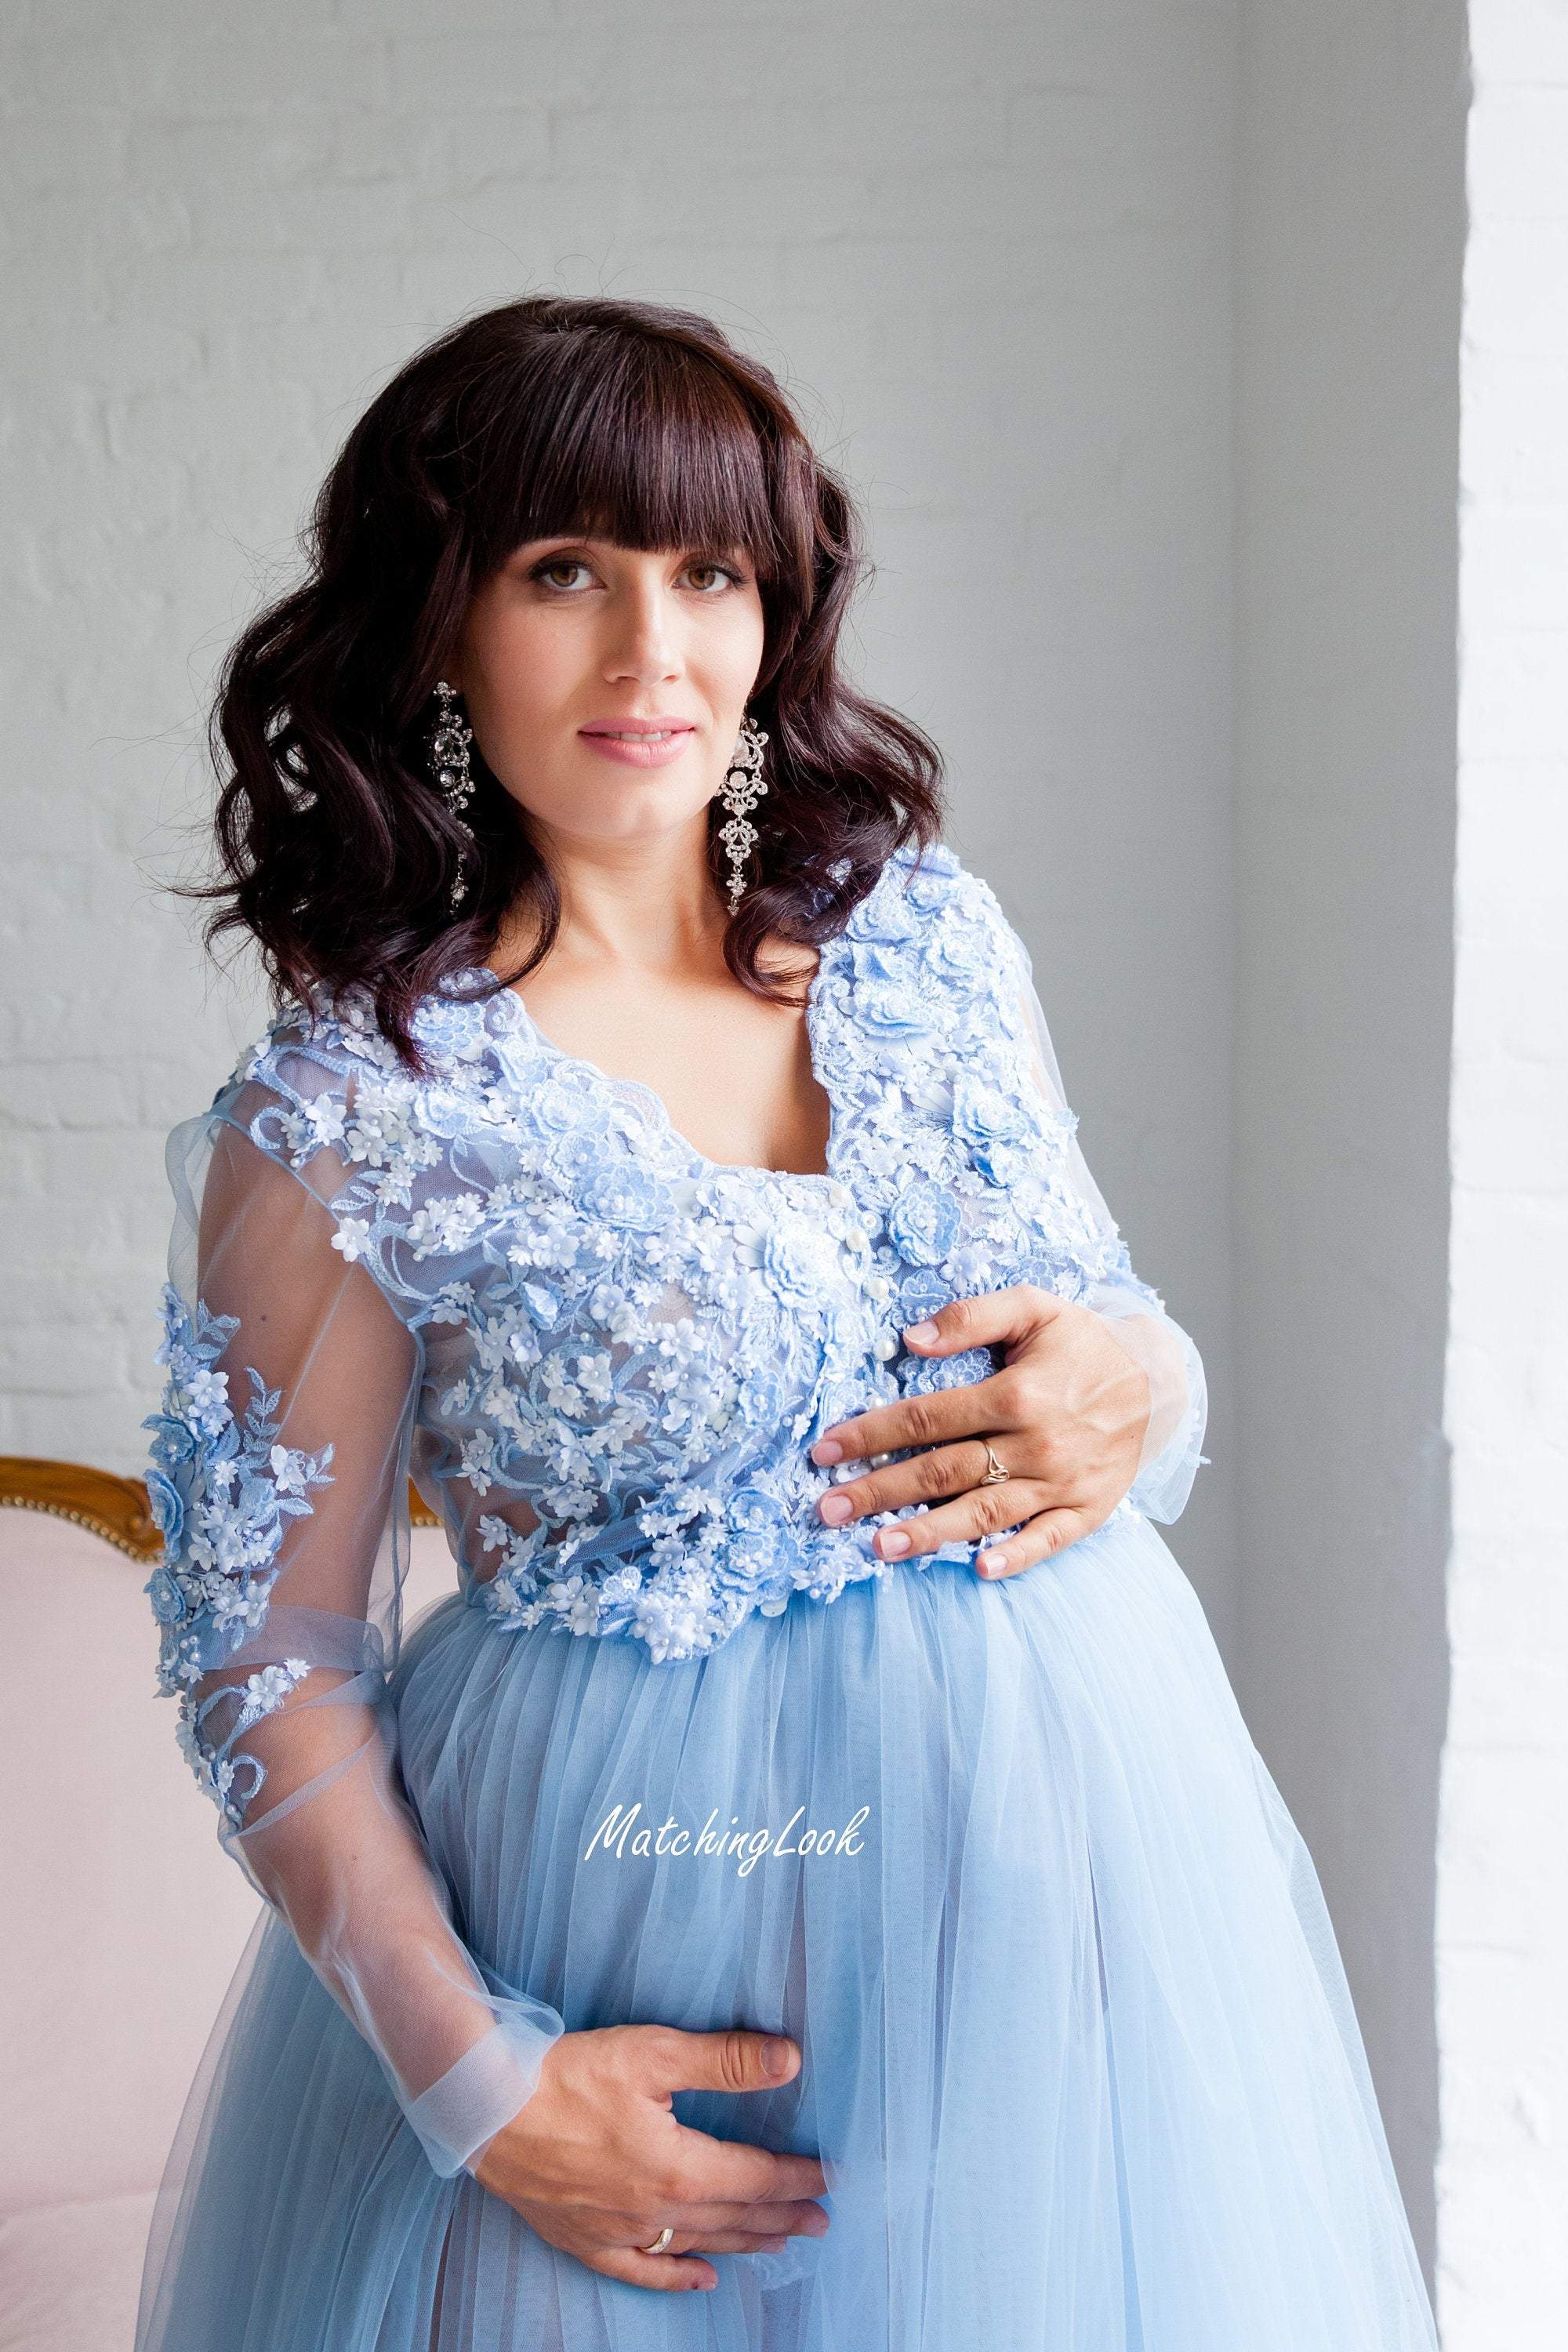 New* Lace Maternity Gown in White – Happily Ever After Maternity